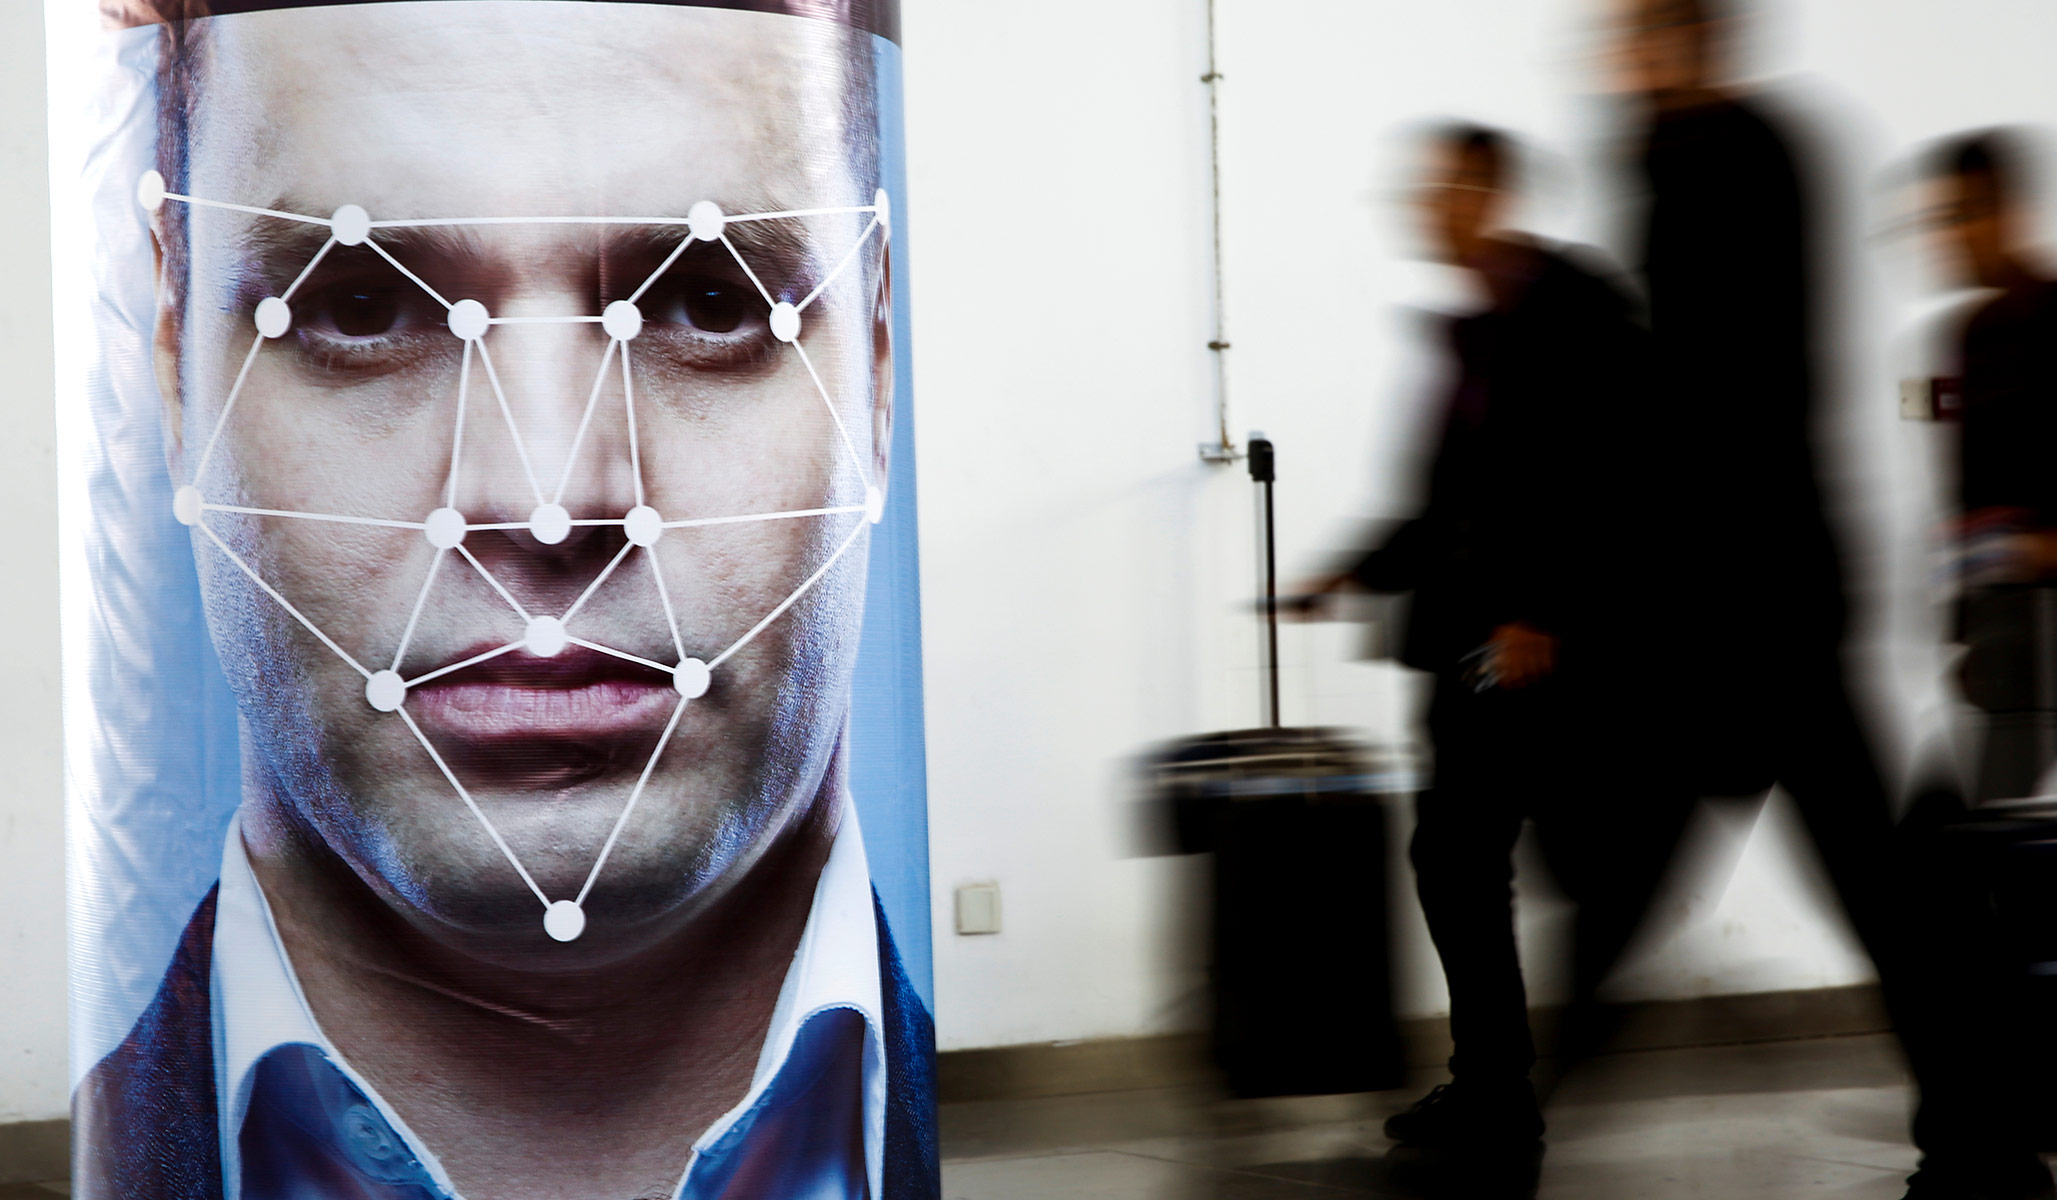 IRS to Require Facial Recognition to Access Online Functions